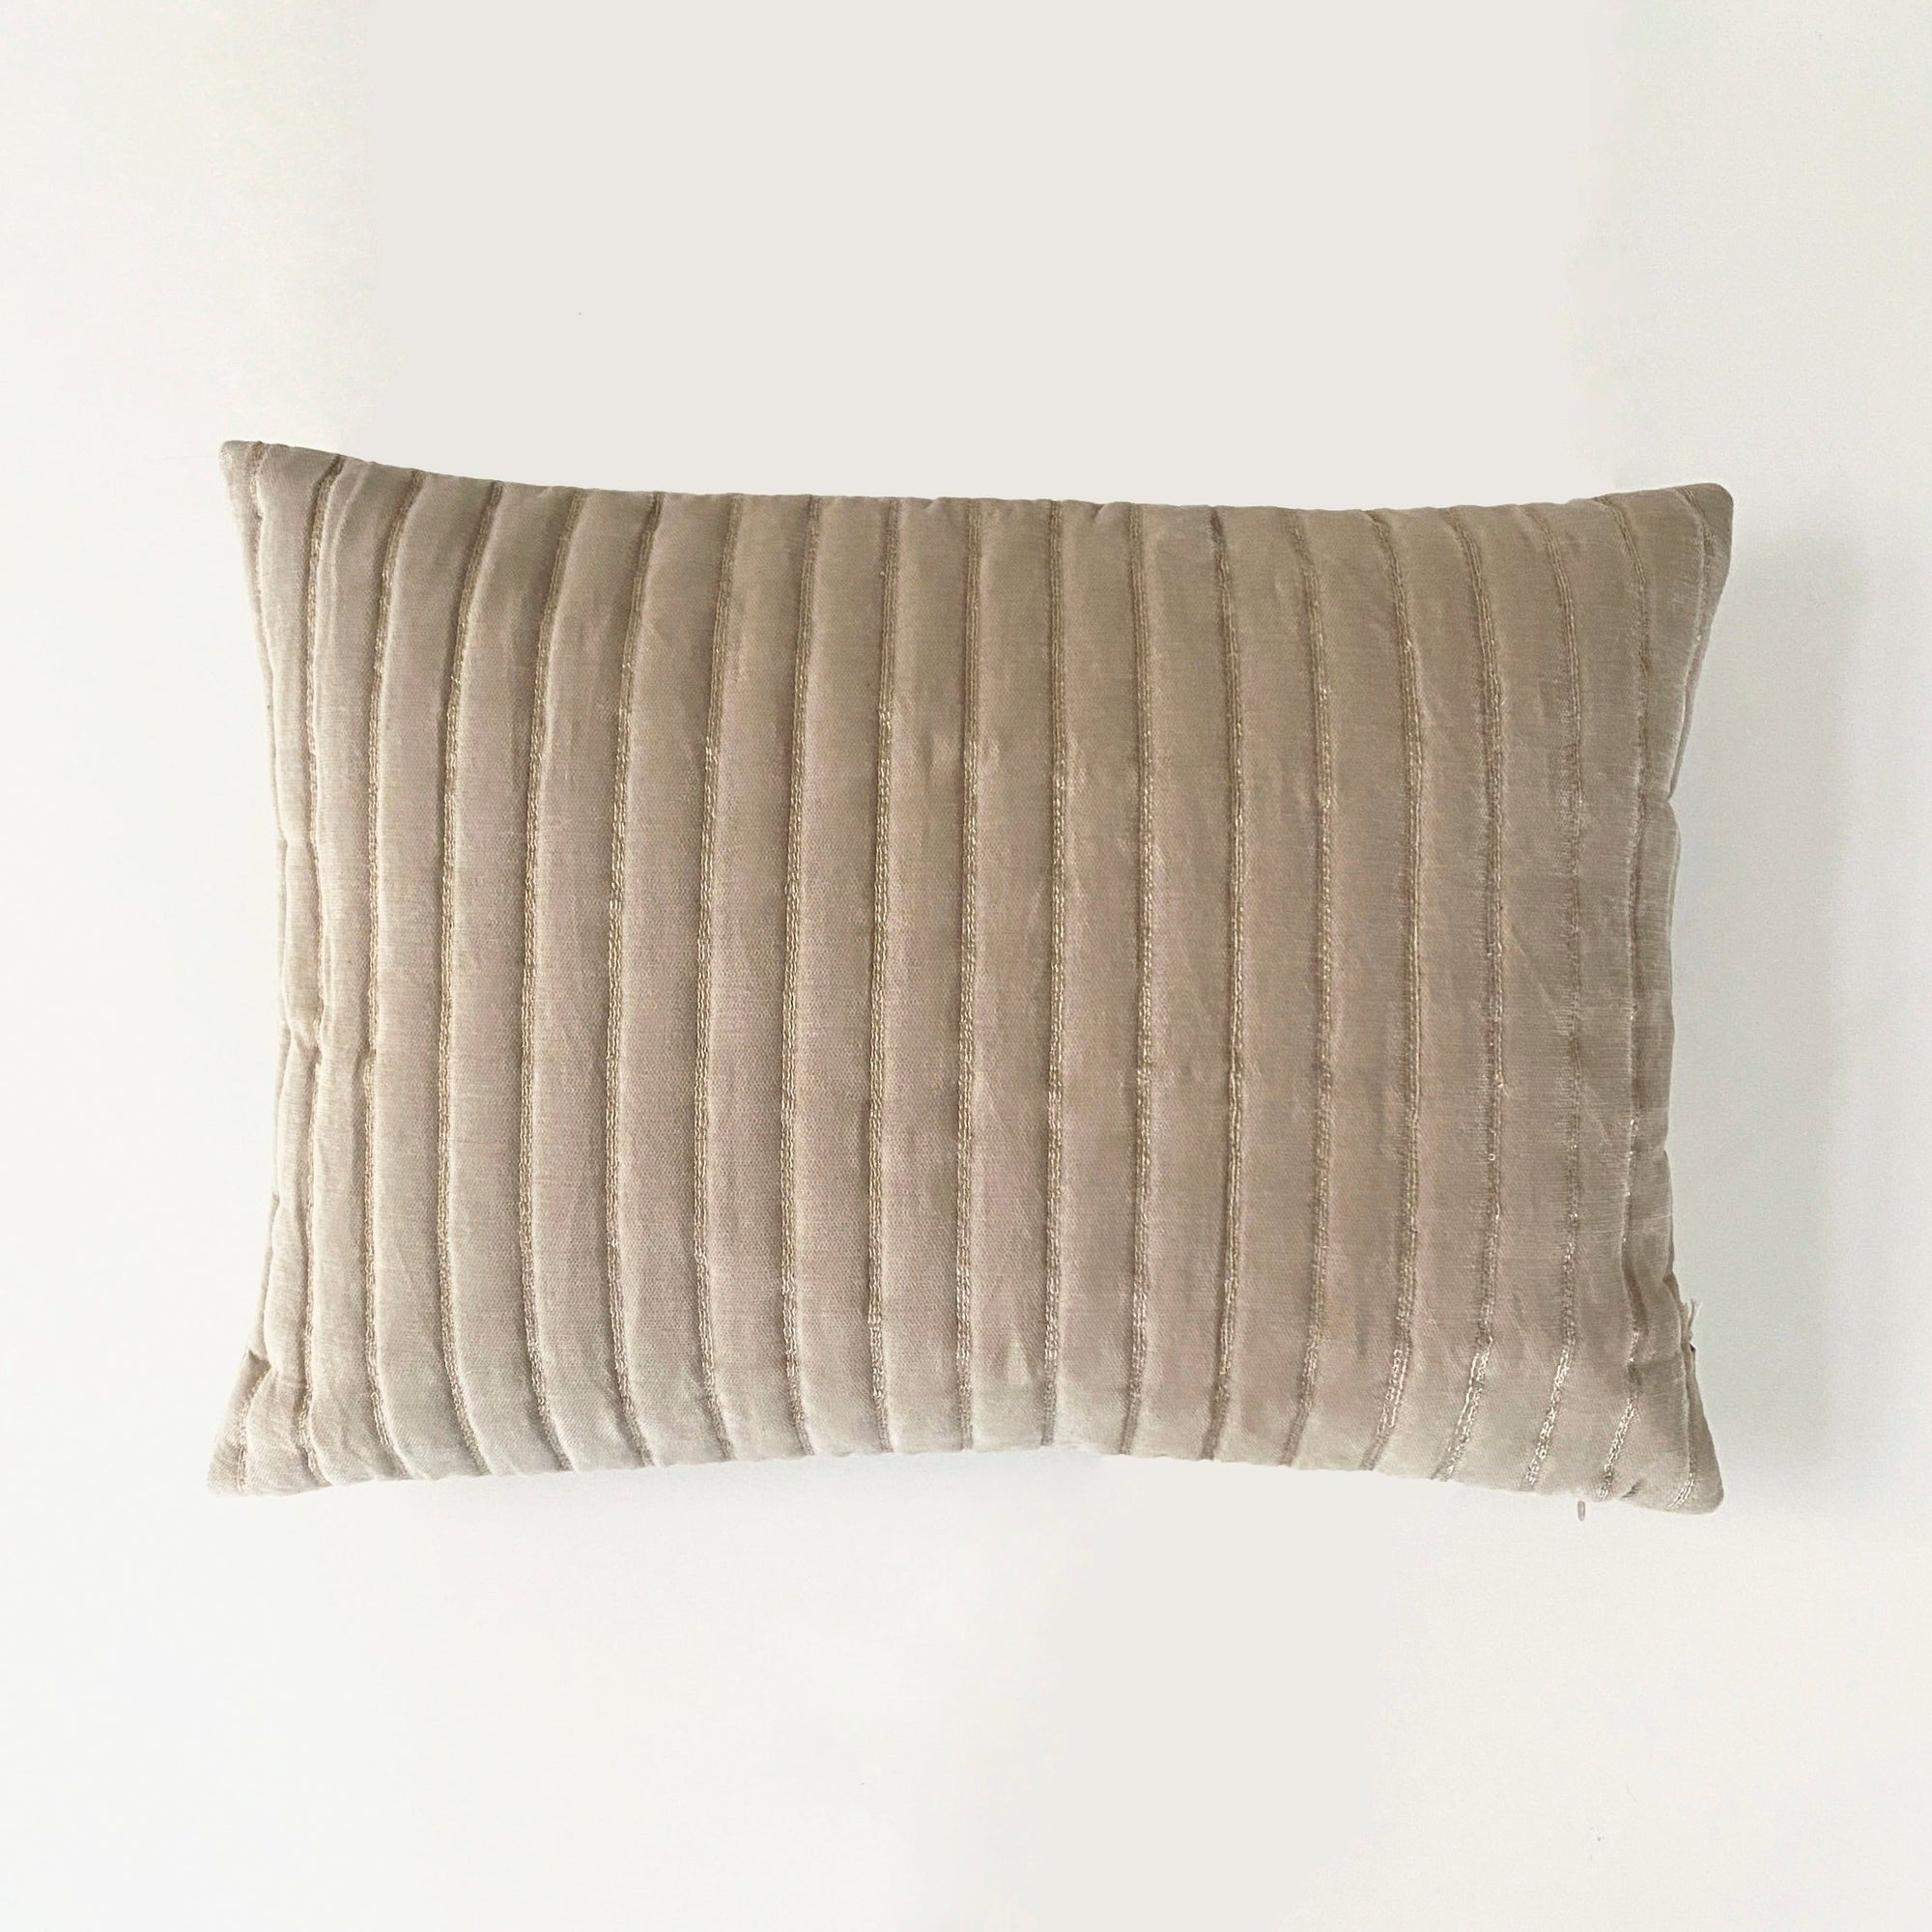 Eden Striped Oatmeal Oblong Cushion Cover by Sanctuary Living - Home Artisan